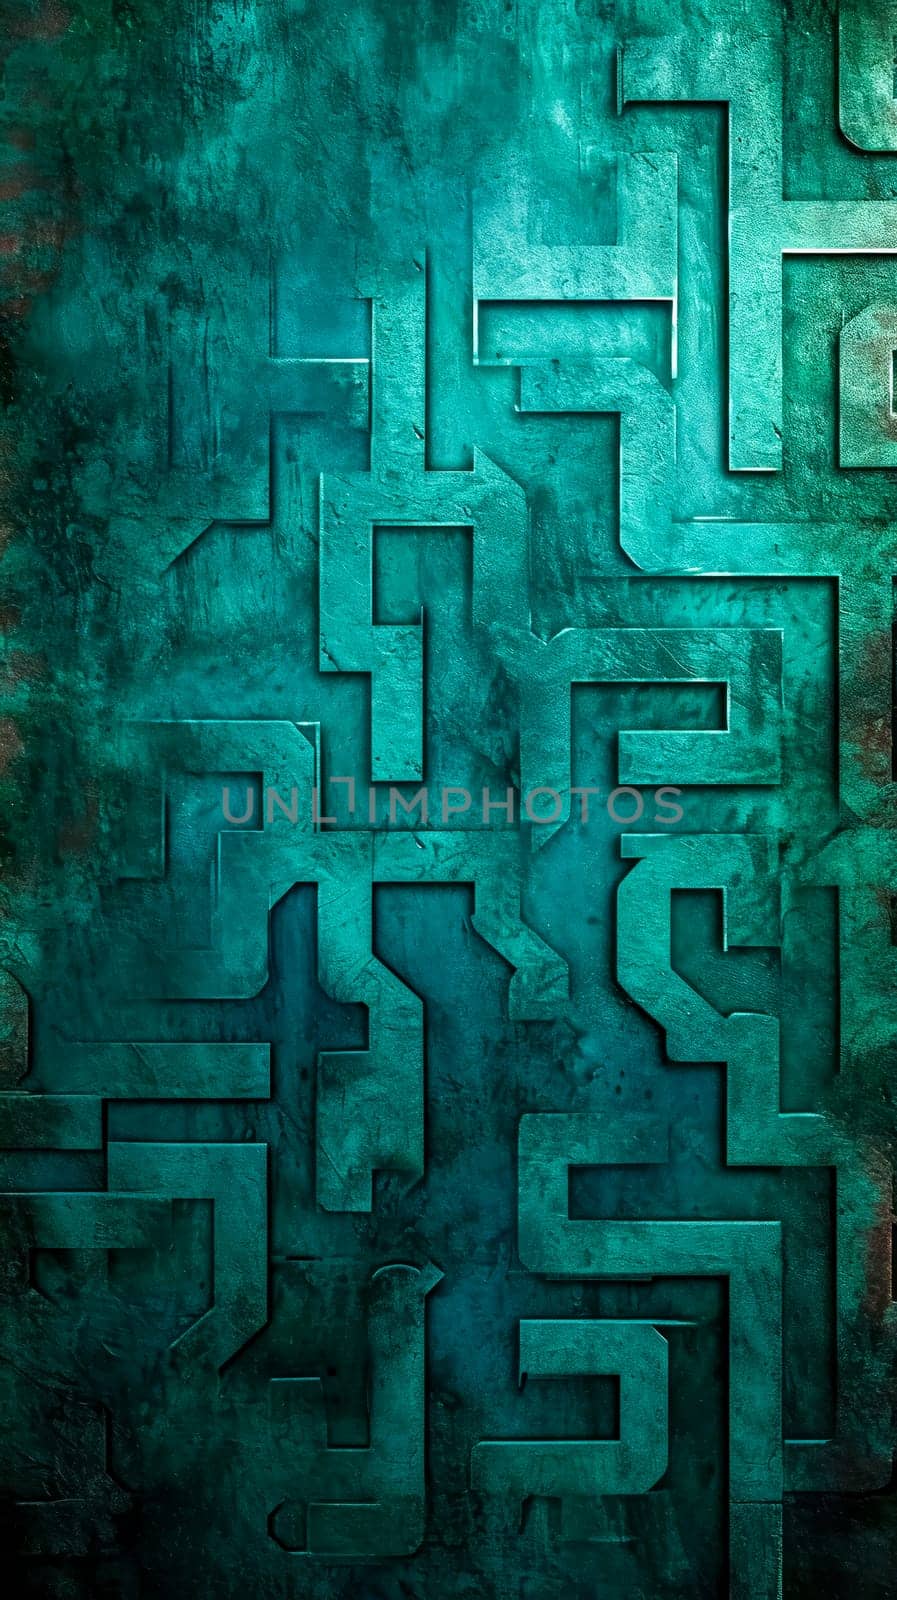 A complex maze design carved into a textured, teal-colored wall, creating a mysterious and thought-provoking background with a strong sense of challenge and intrigue, vertical